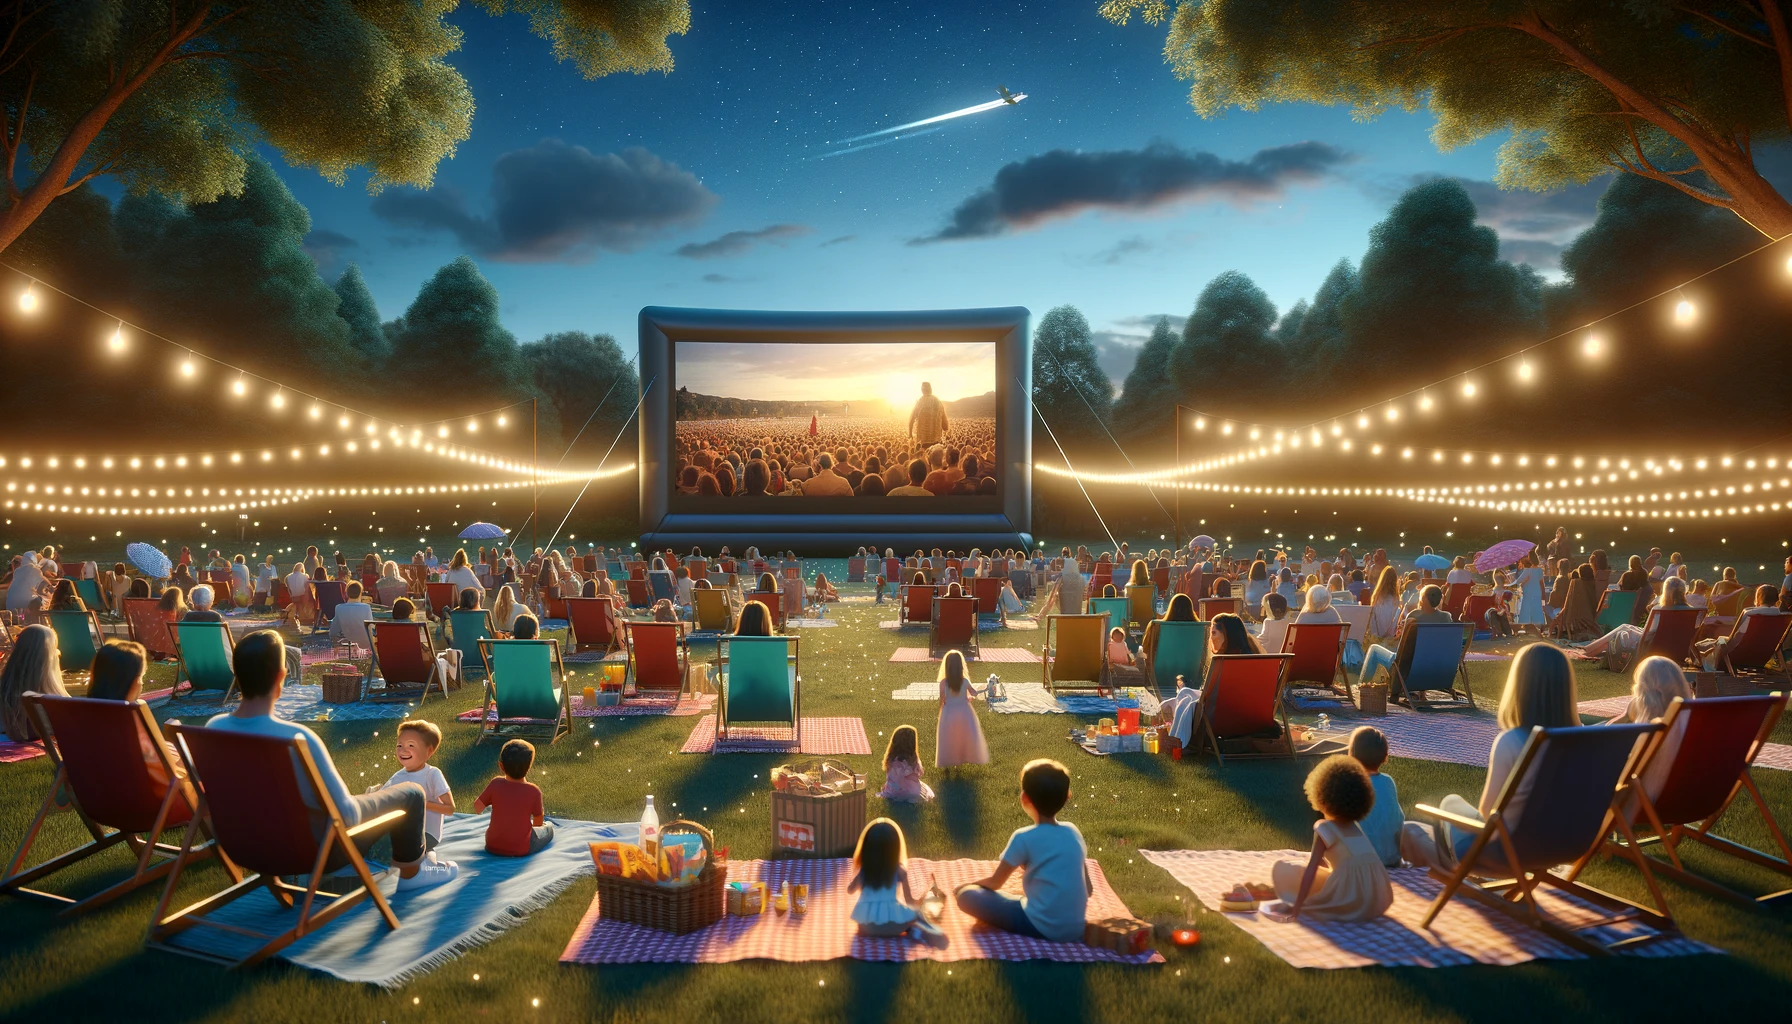 A crowd of families and children watching an outdoor movie under string lights at night, with trees and a starry sky in the background. This scene depicts a summer movie night for kids in Raleigh, featuring a large inflatable screen and picnic setups.